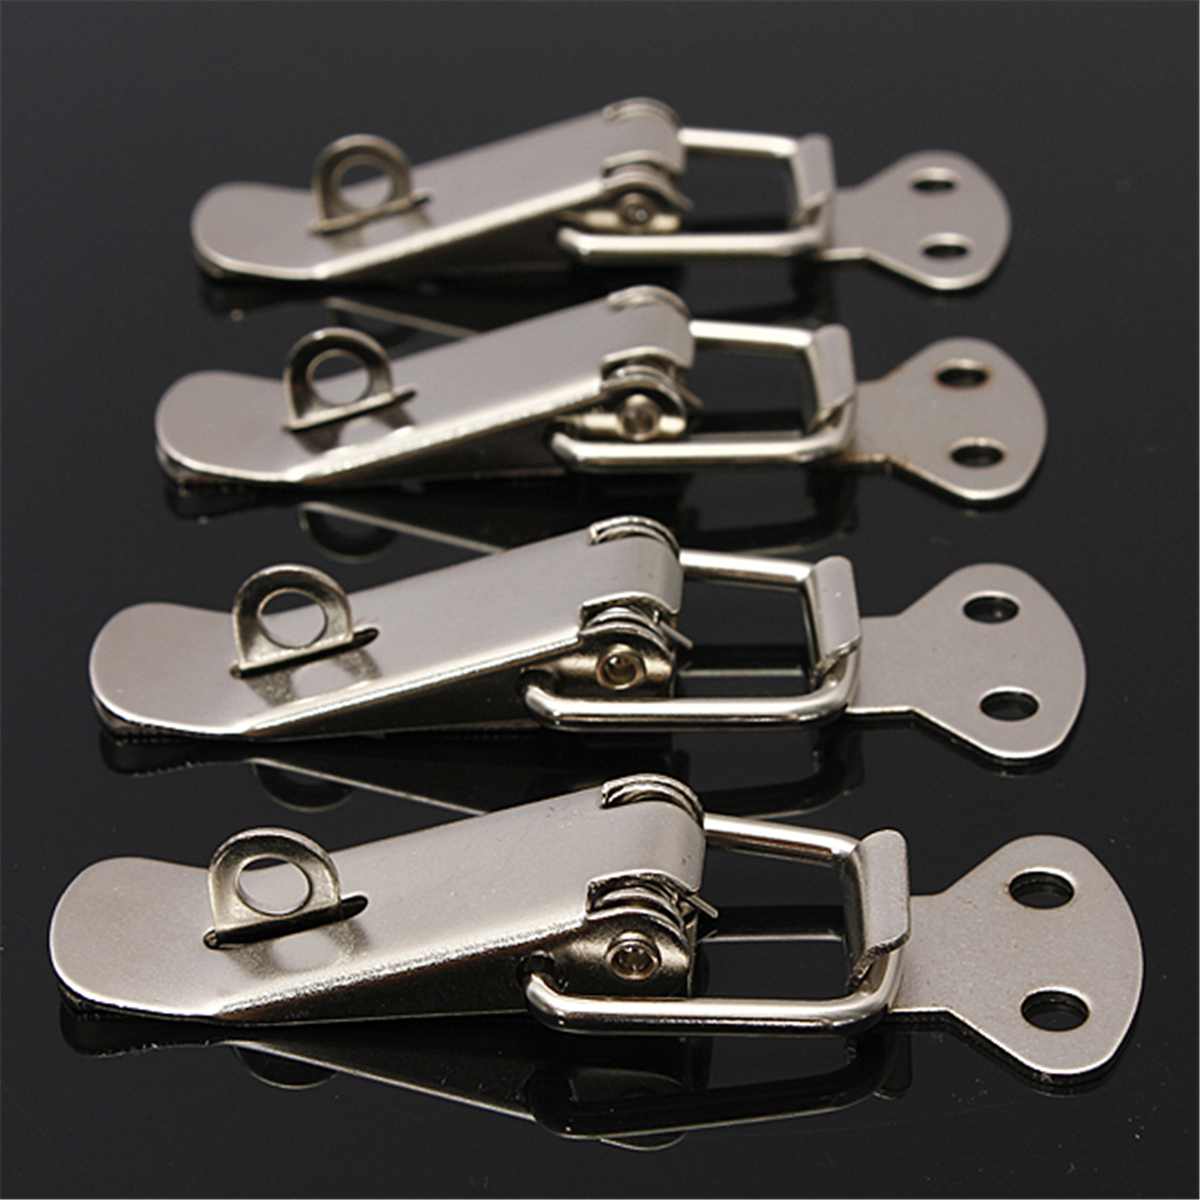 4PCS-Case-Box-Chest-Spring-Stainless-Tone-Lock-Toggle-Latch-Catch-Clasp-948011-4